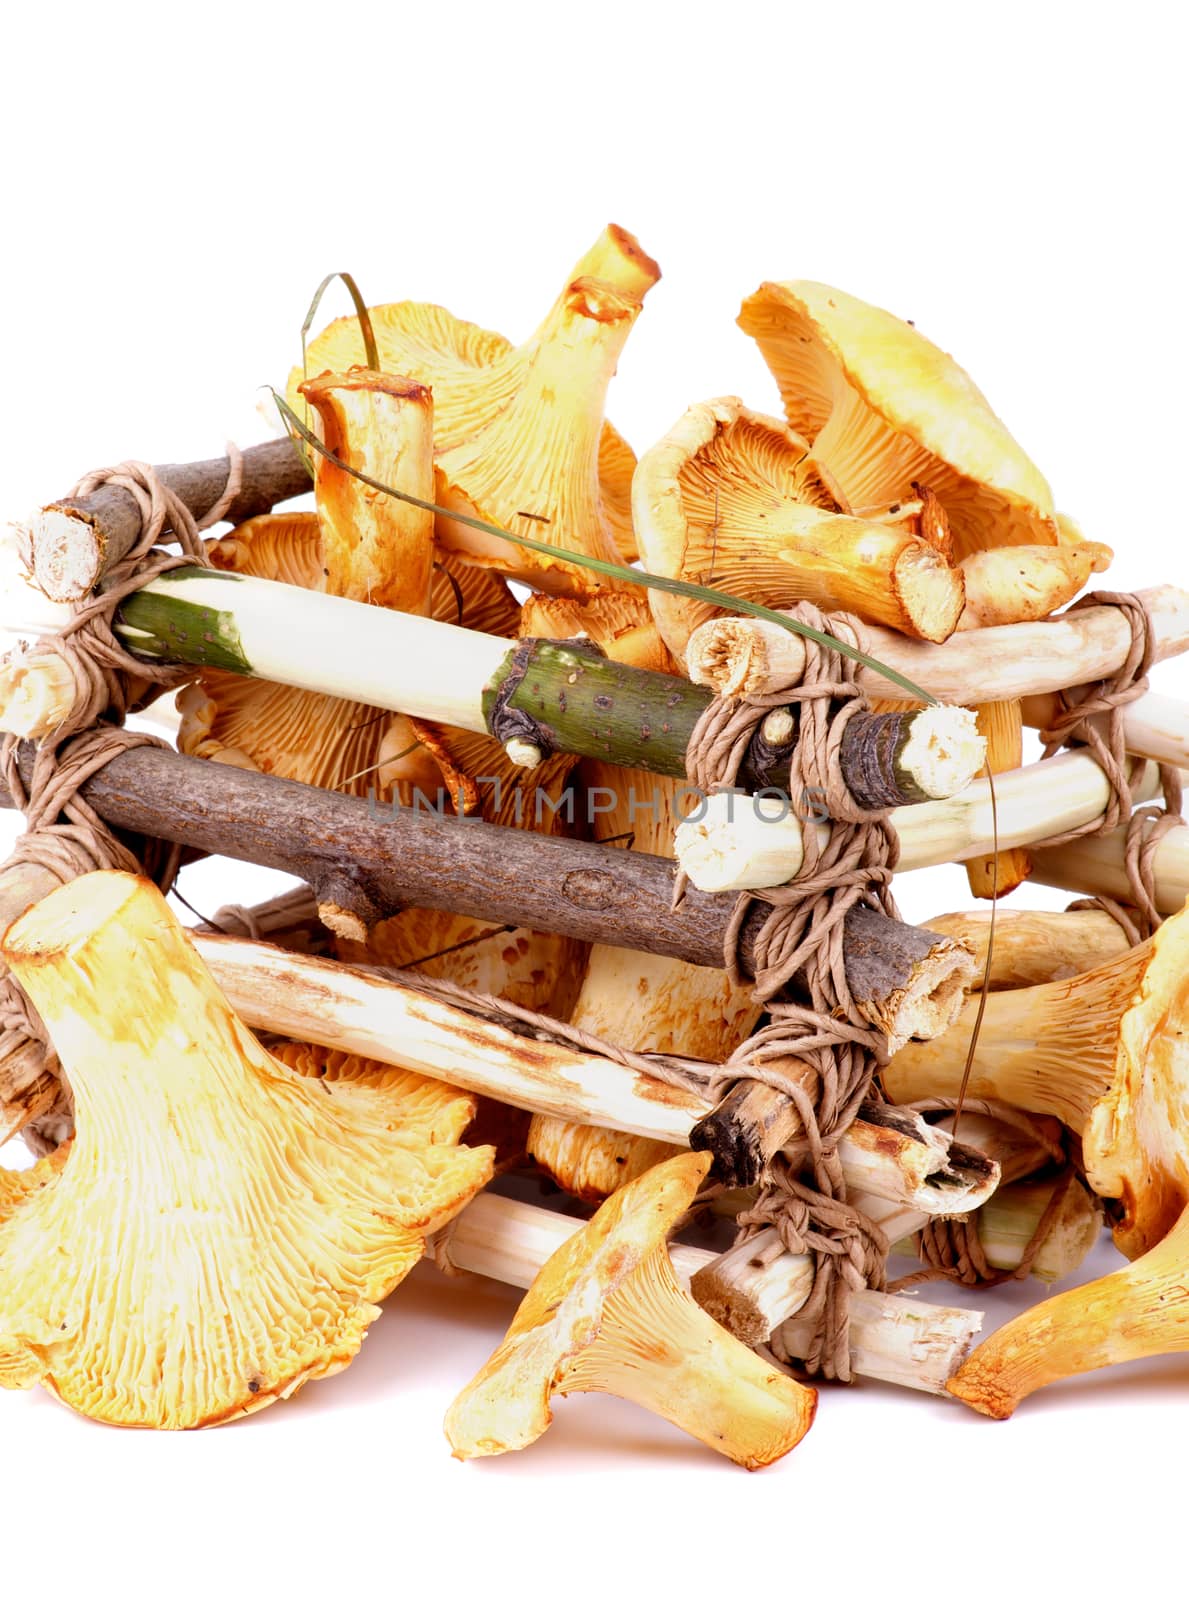 Arrangement of Raw Chanterelles with Grass in Tree Branch Box isolated on White background